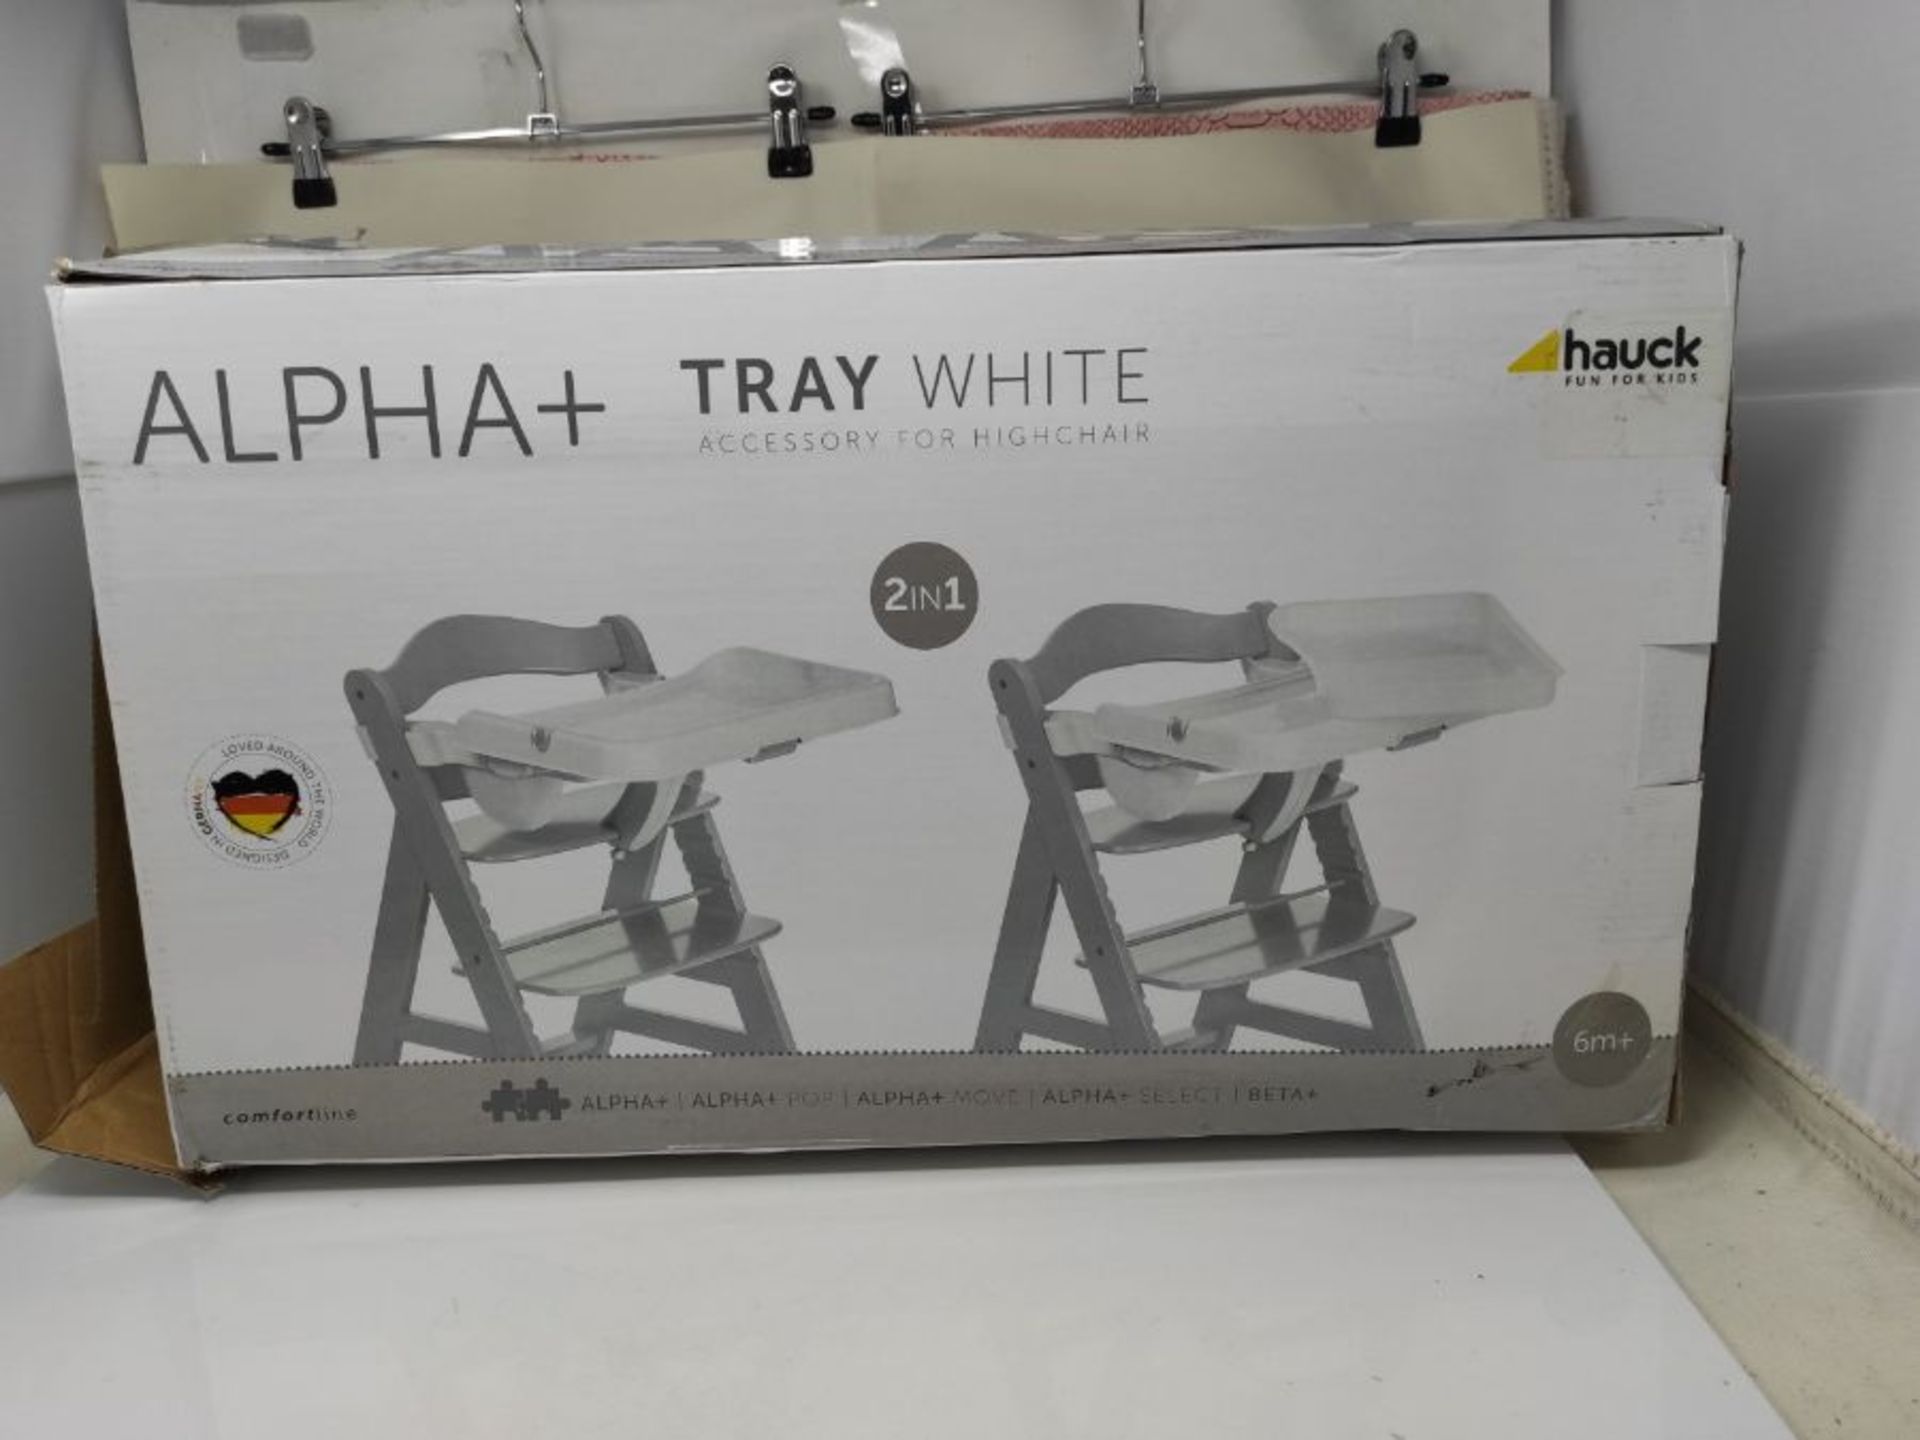 Hauck Alpha Tray, 3-in-1 Table Set for Hauck Wooden Highchairs Alpha, Beta, Depth Ad - Image 2 of 3